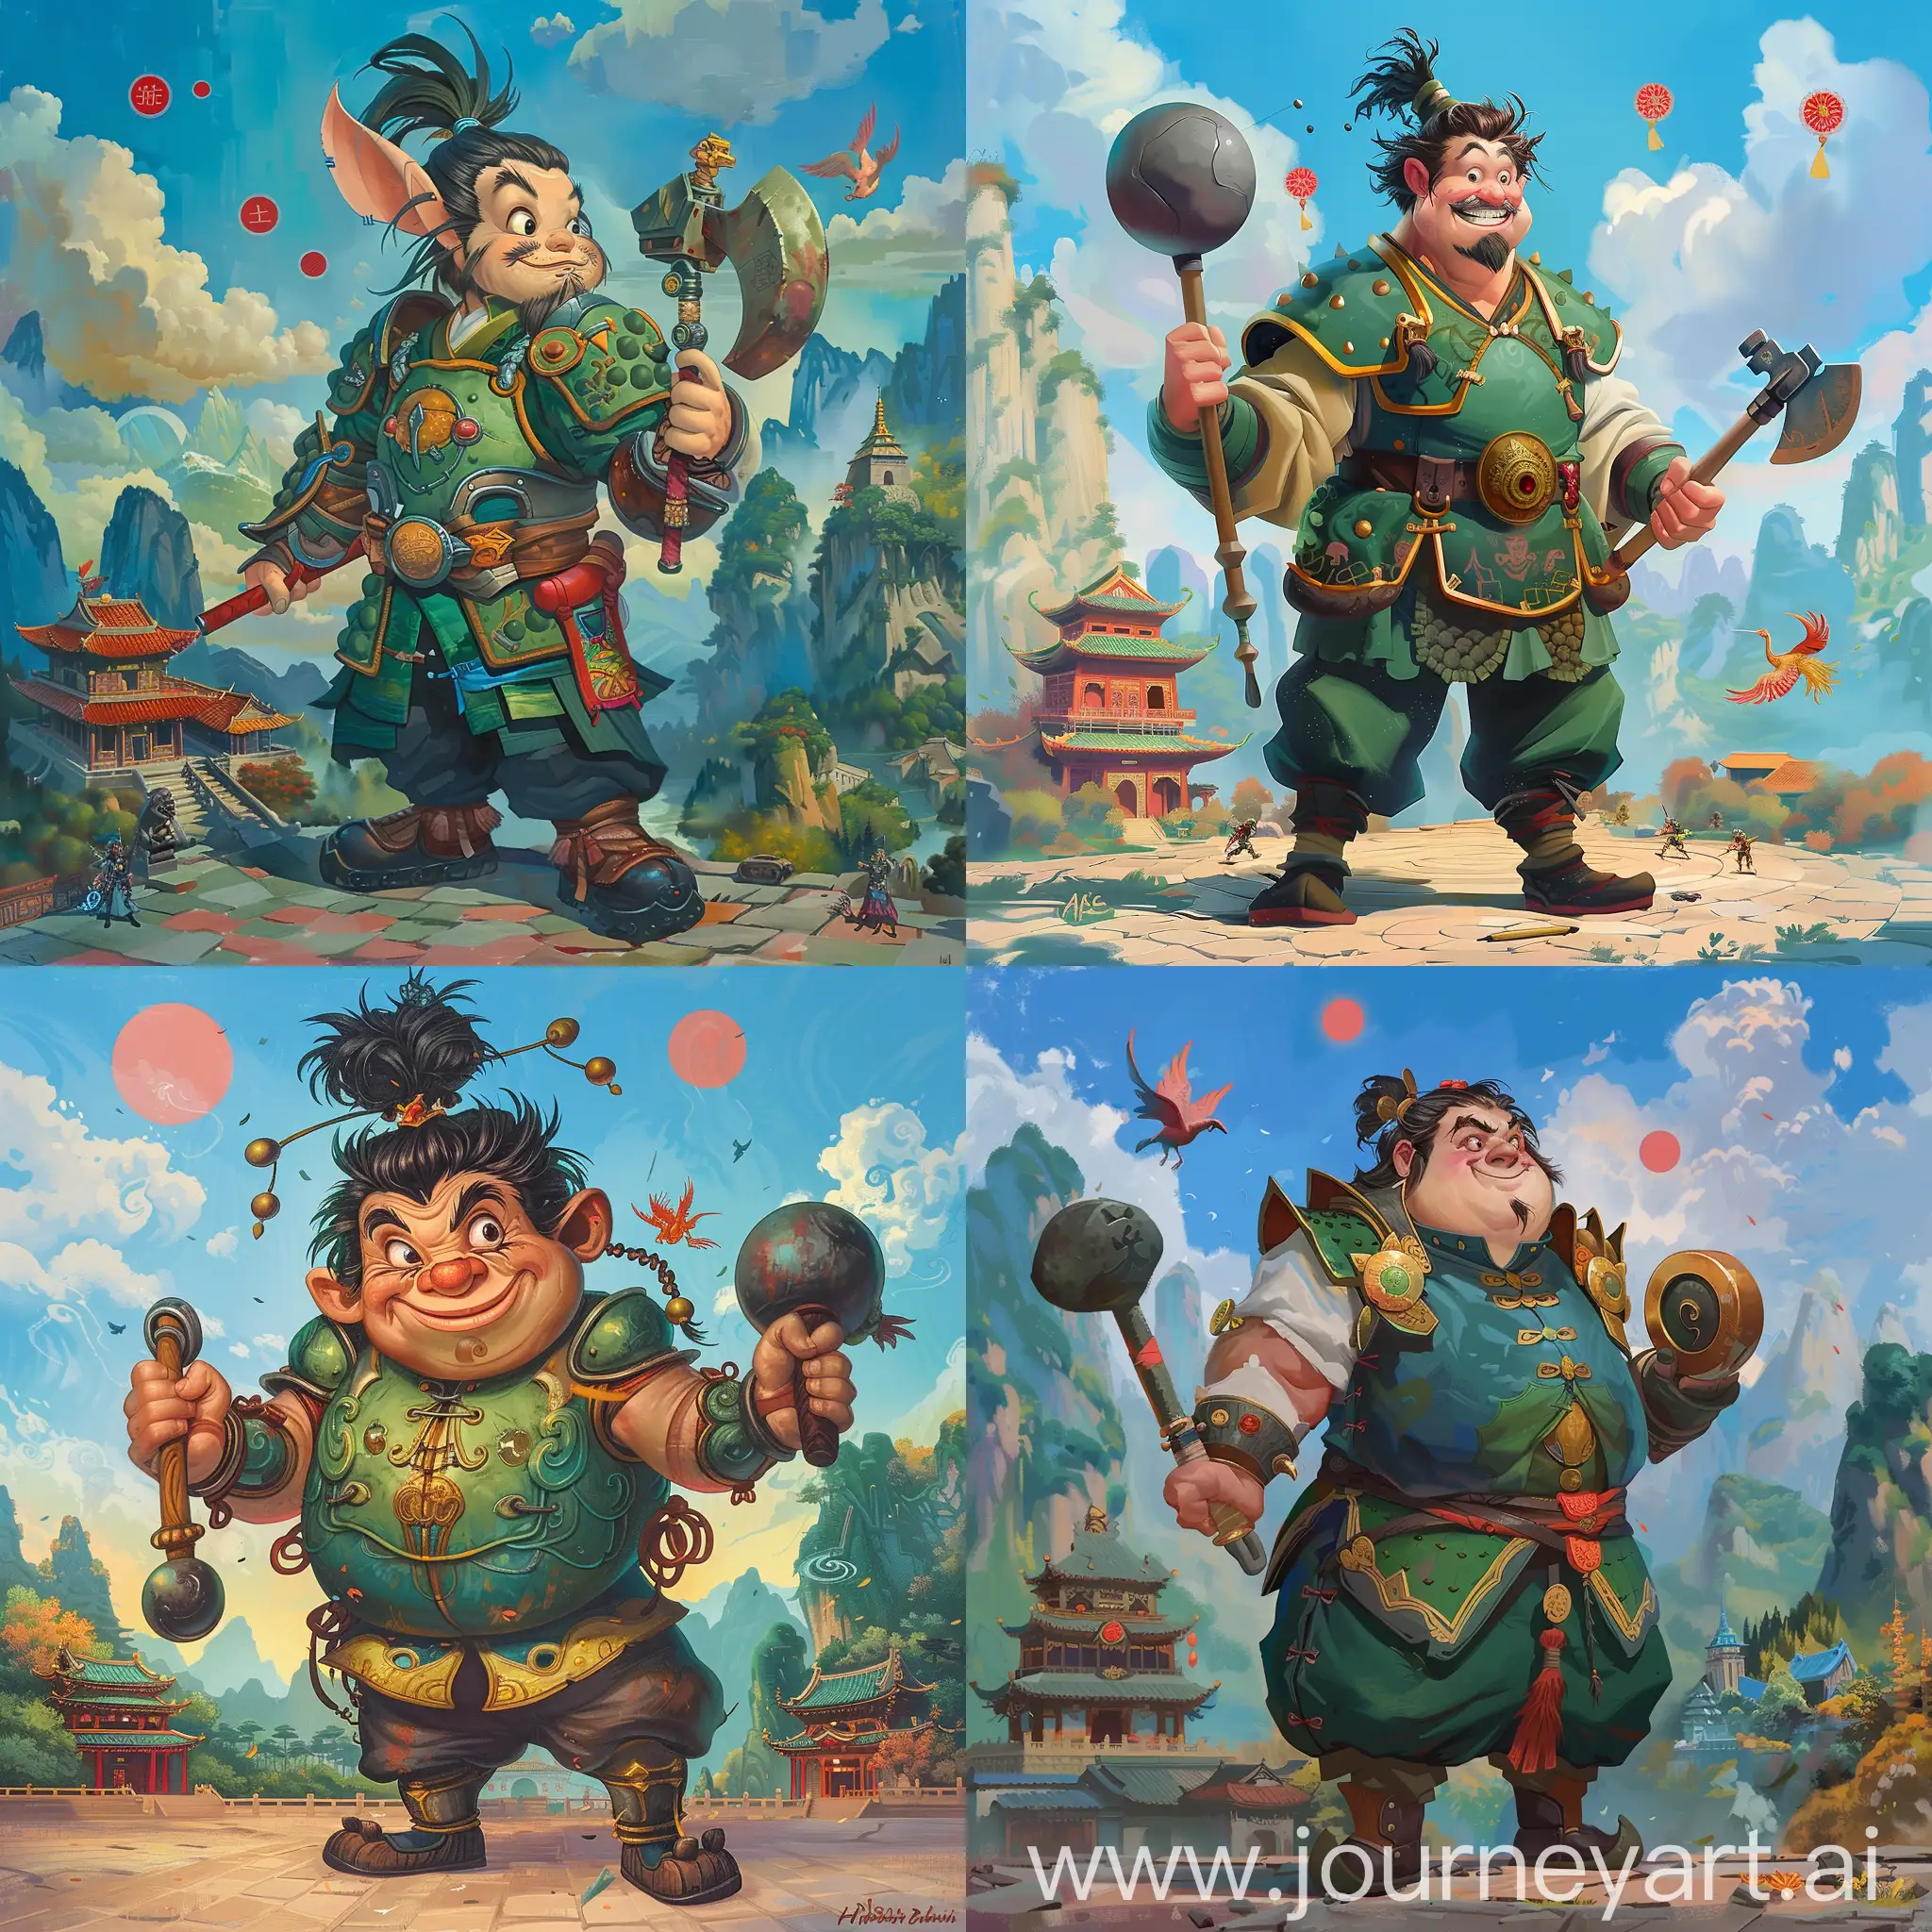 Historic painting style:

a Disney sincere and friendly  Quasimodo, from the Hunchback of Notre Dame cartoon, he has Chinese medieval Ming Dynasty hair style, he wears deep green and light green color Chinese style medieval armor, dark soil color pants and shoes, he holds a Chinese round war hammer in right hand, 

Chinese Guilin mountains and temple as background, small phoenix and three small red suns in blue sky.
